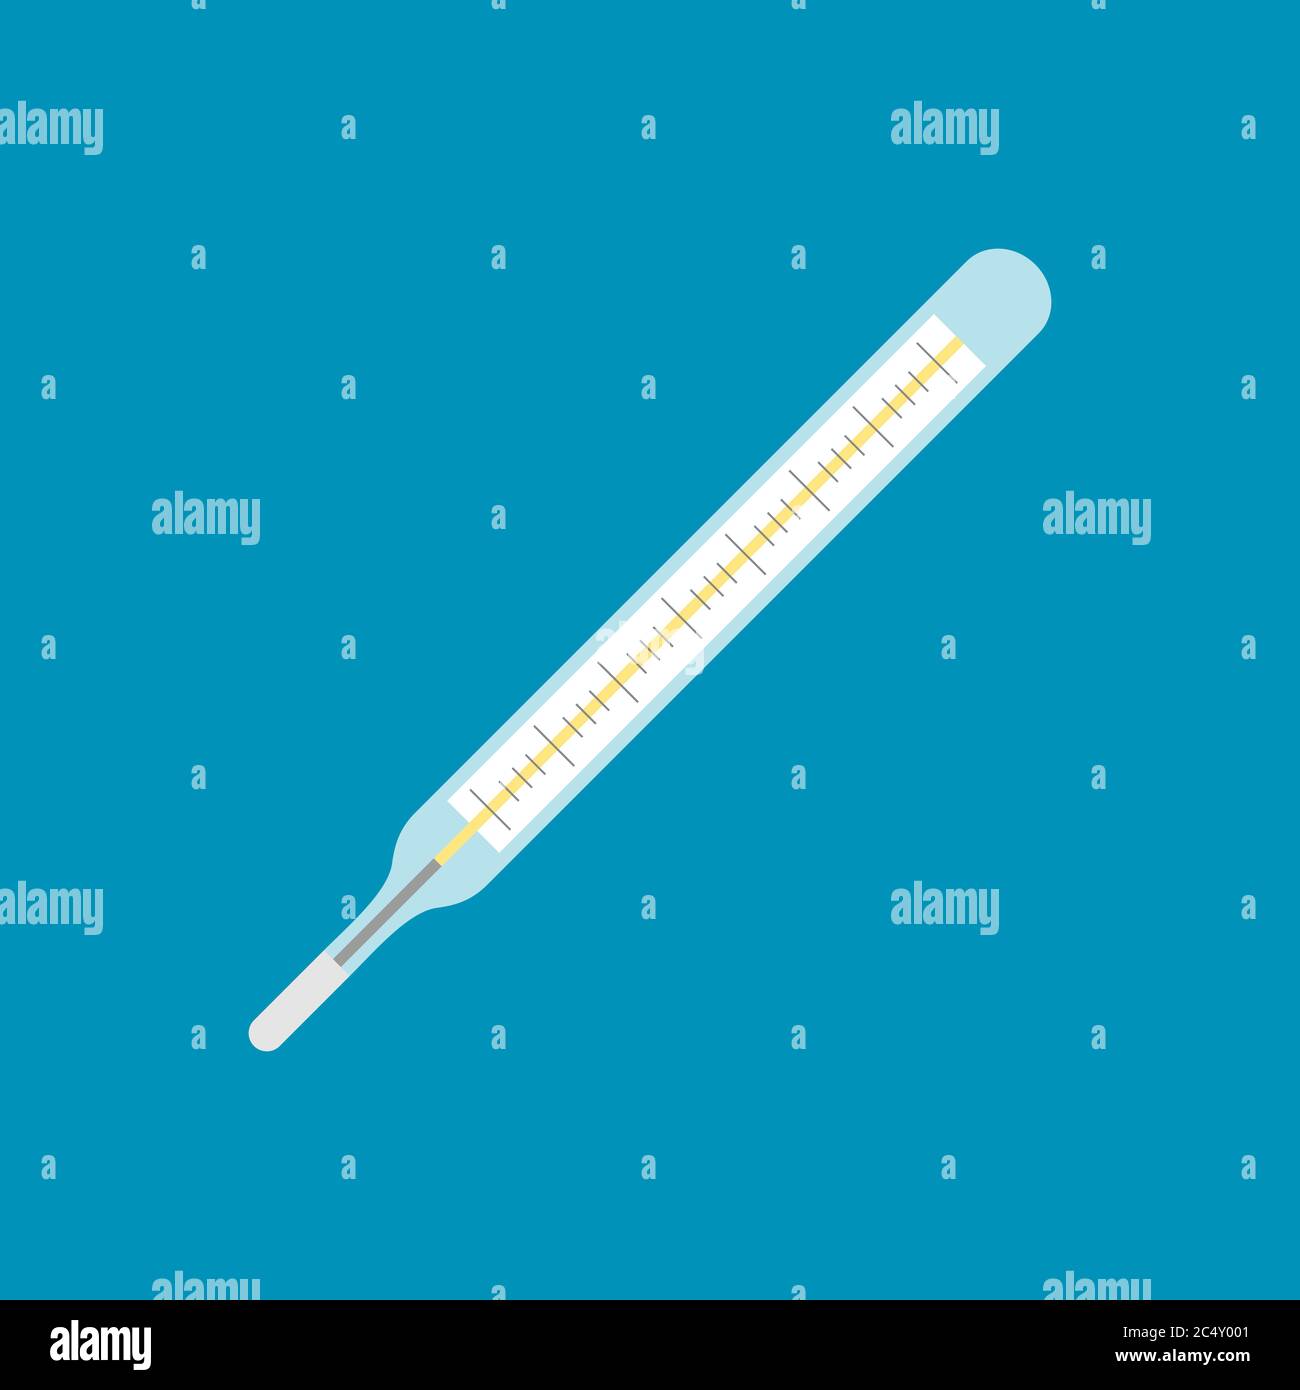 https://c8.alamy.com/comp/2C4Y001/old-fashioned-glass-thermometer-for-body-temperature-measurement-on-blue-background-a-thermometer-with-mercury-for-accurate-measuring-fever-vector-2C4Y001.jpg